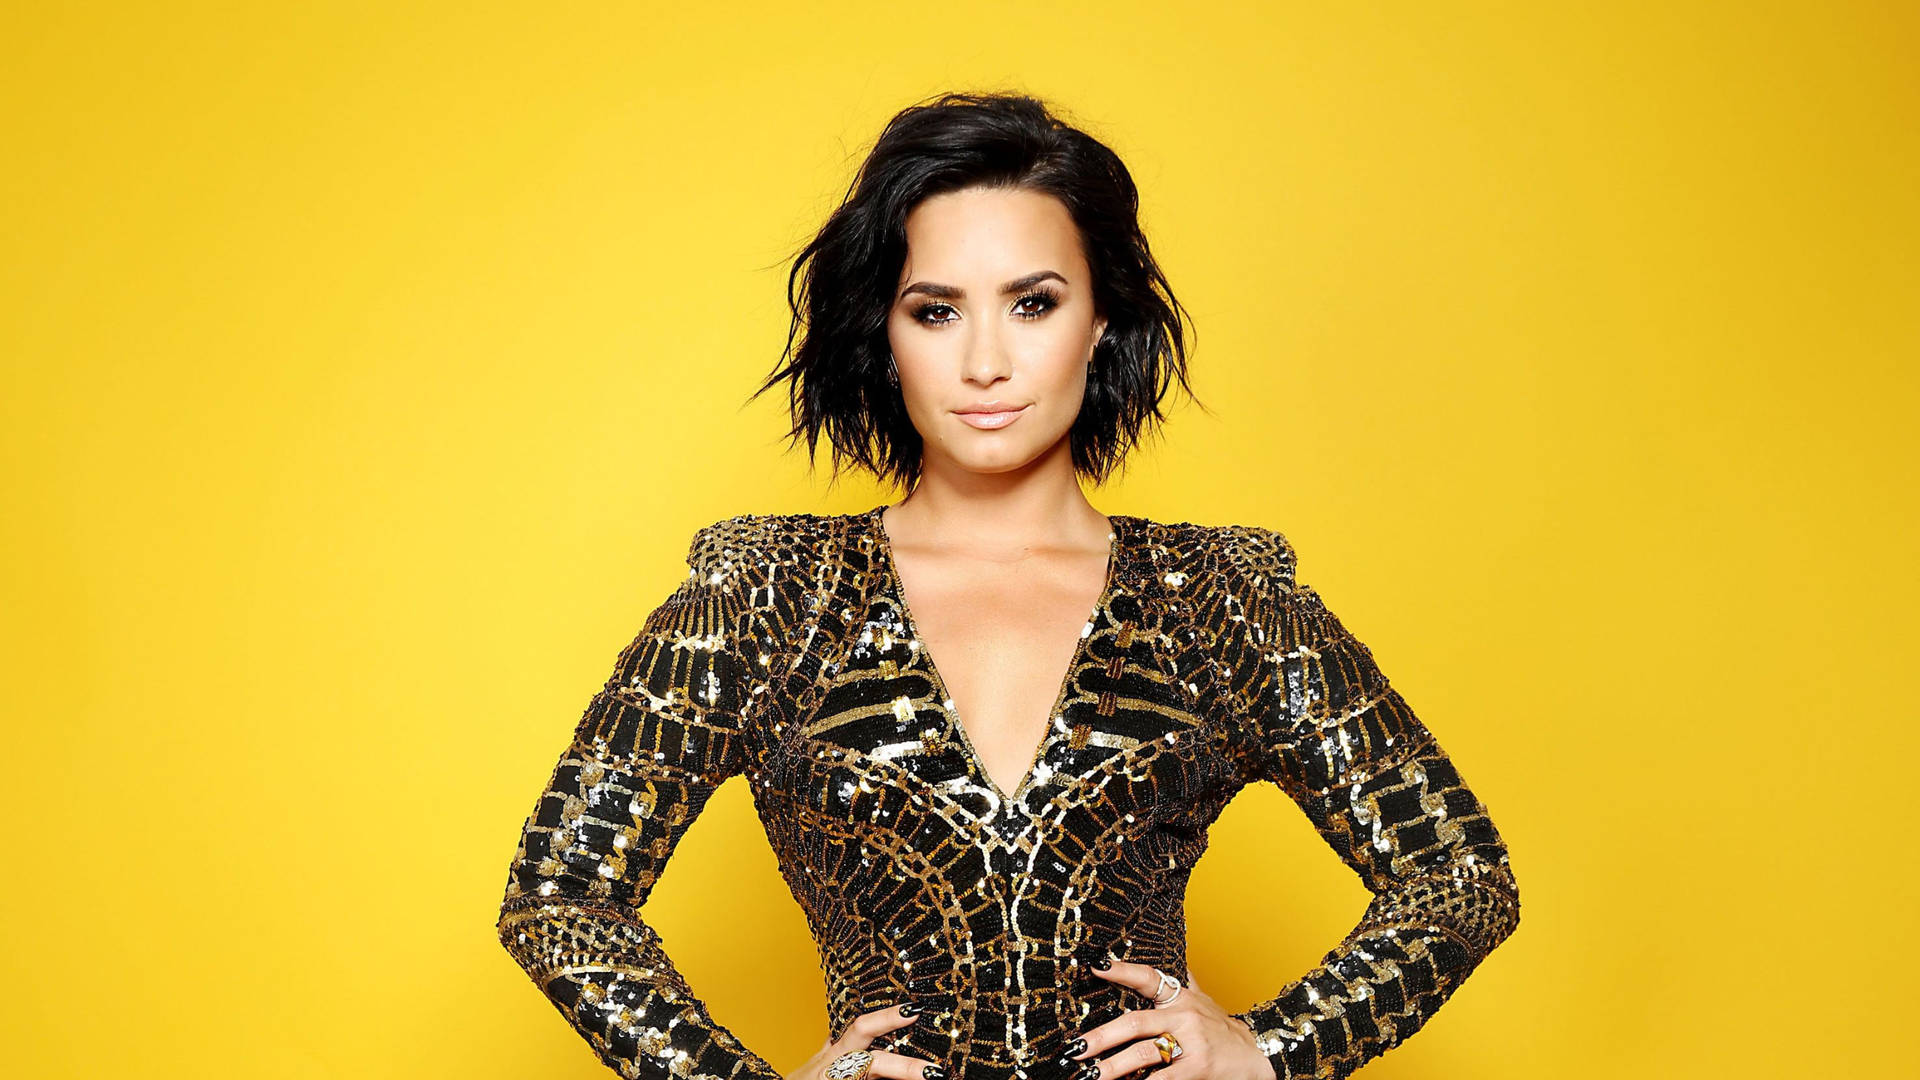 Demi Lovato Black And Gold Outfit Background